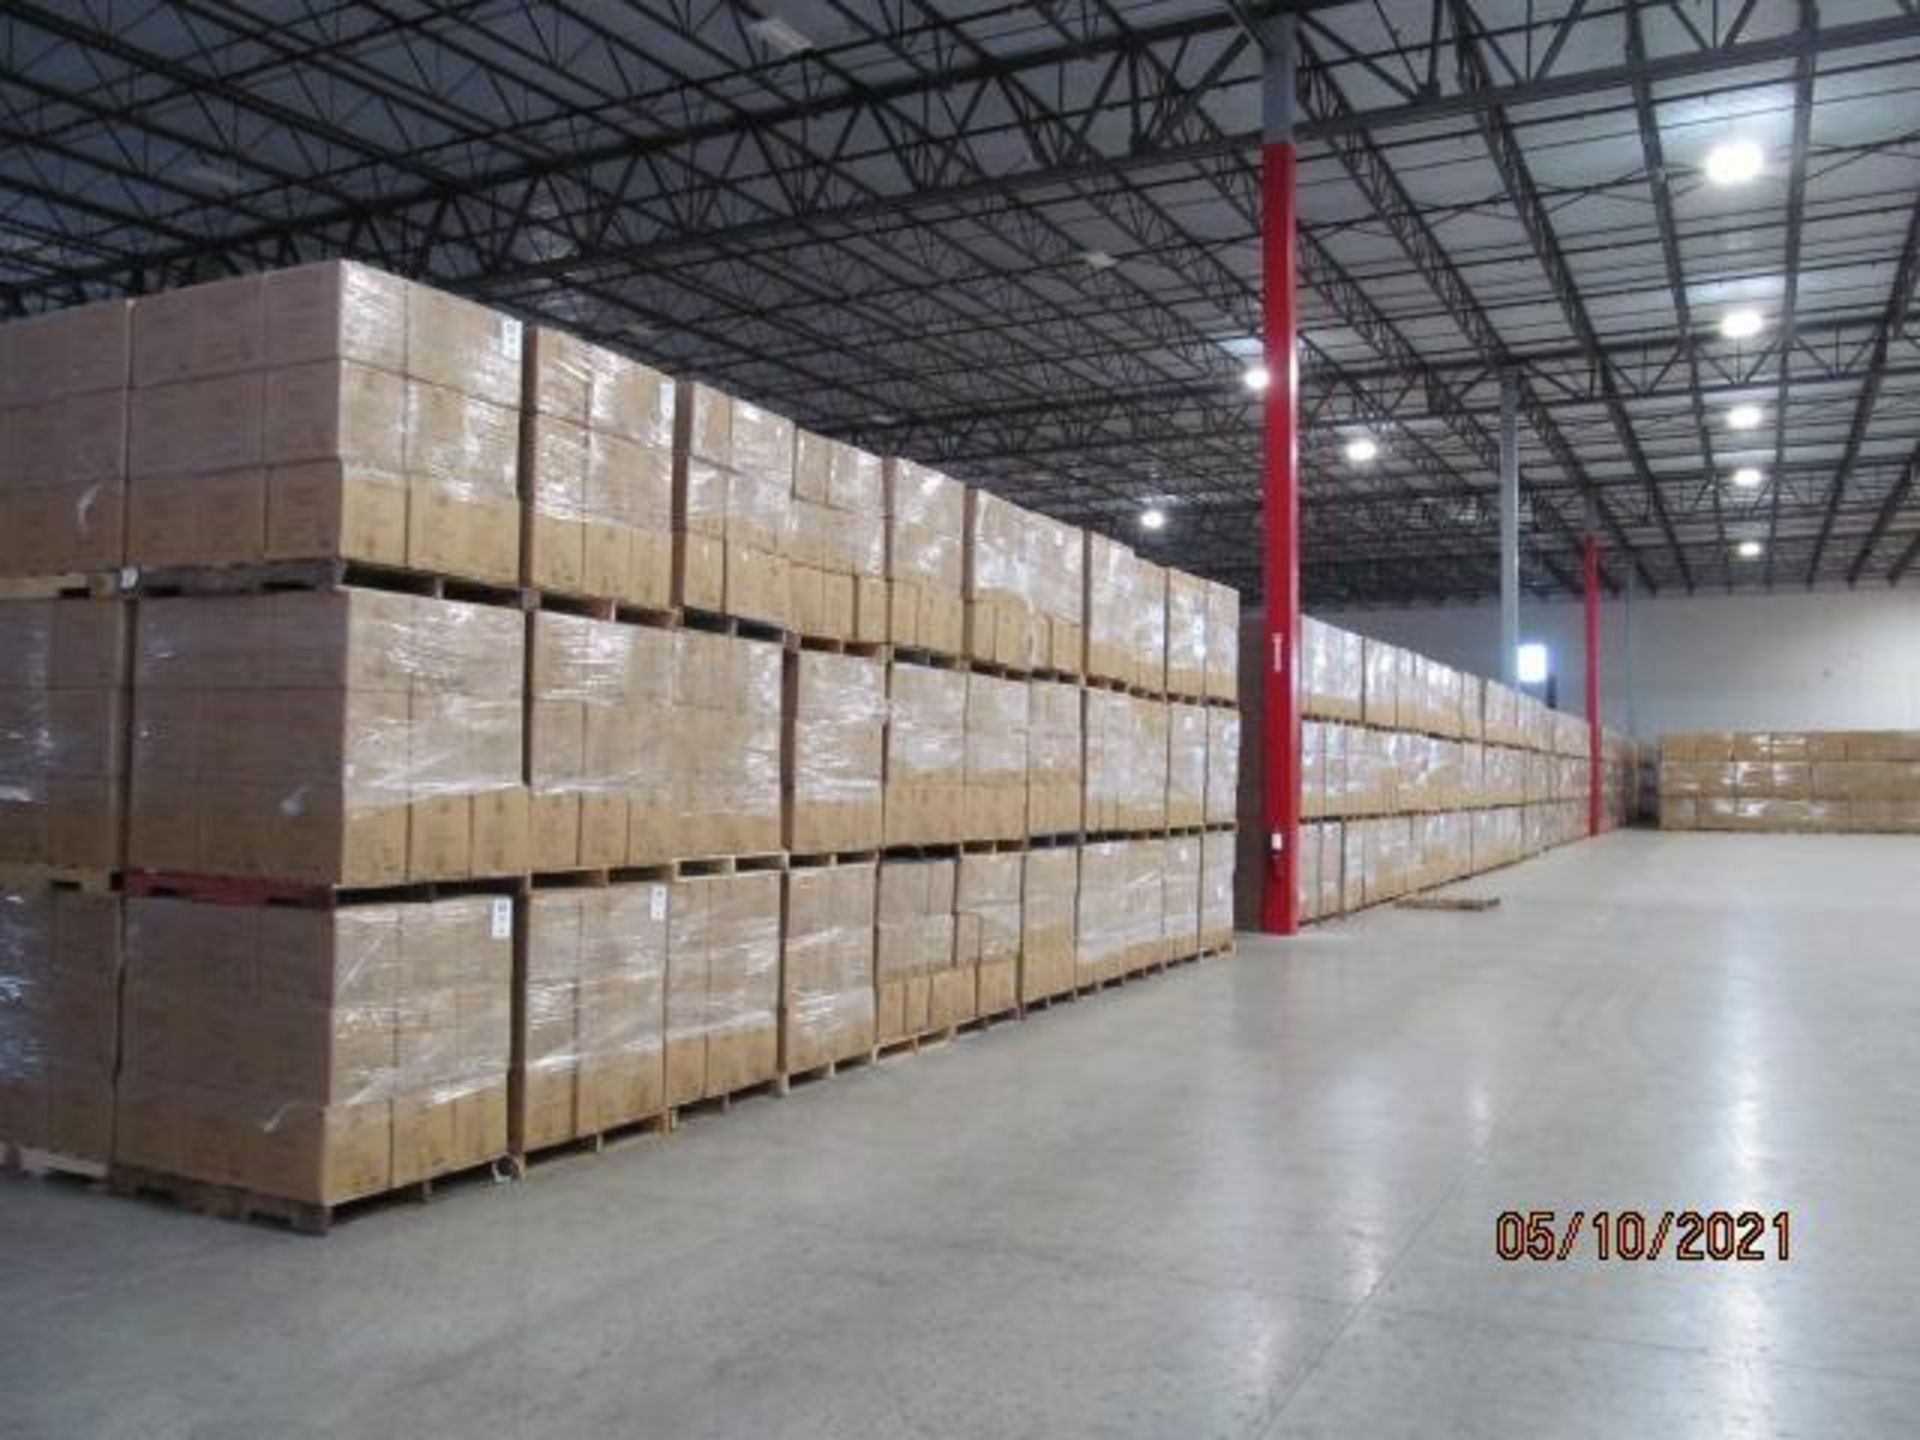 Lot of Waxman Kleen Freak Sanitizing Wipes consisting of 29,027 packages on 45 pallets. Each package - Image 8 of 11